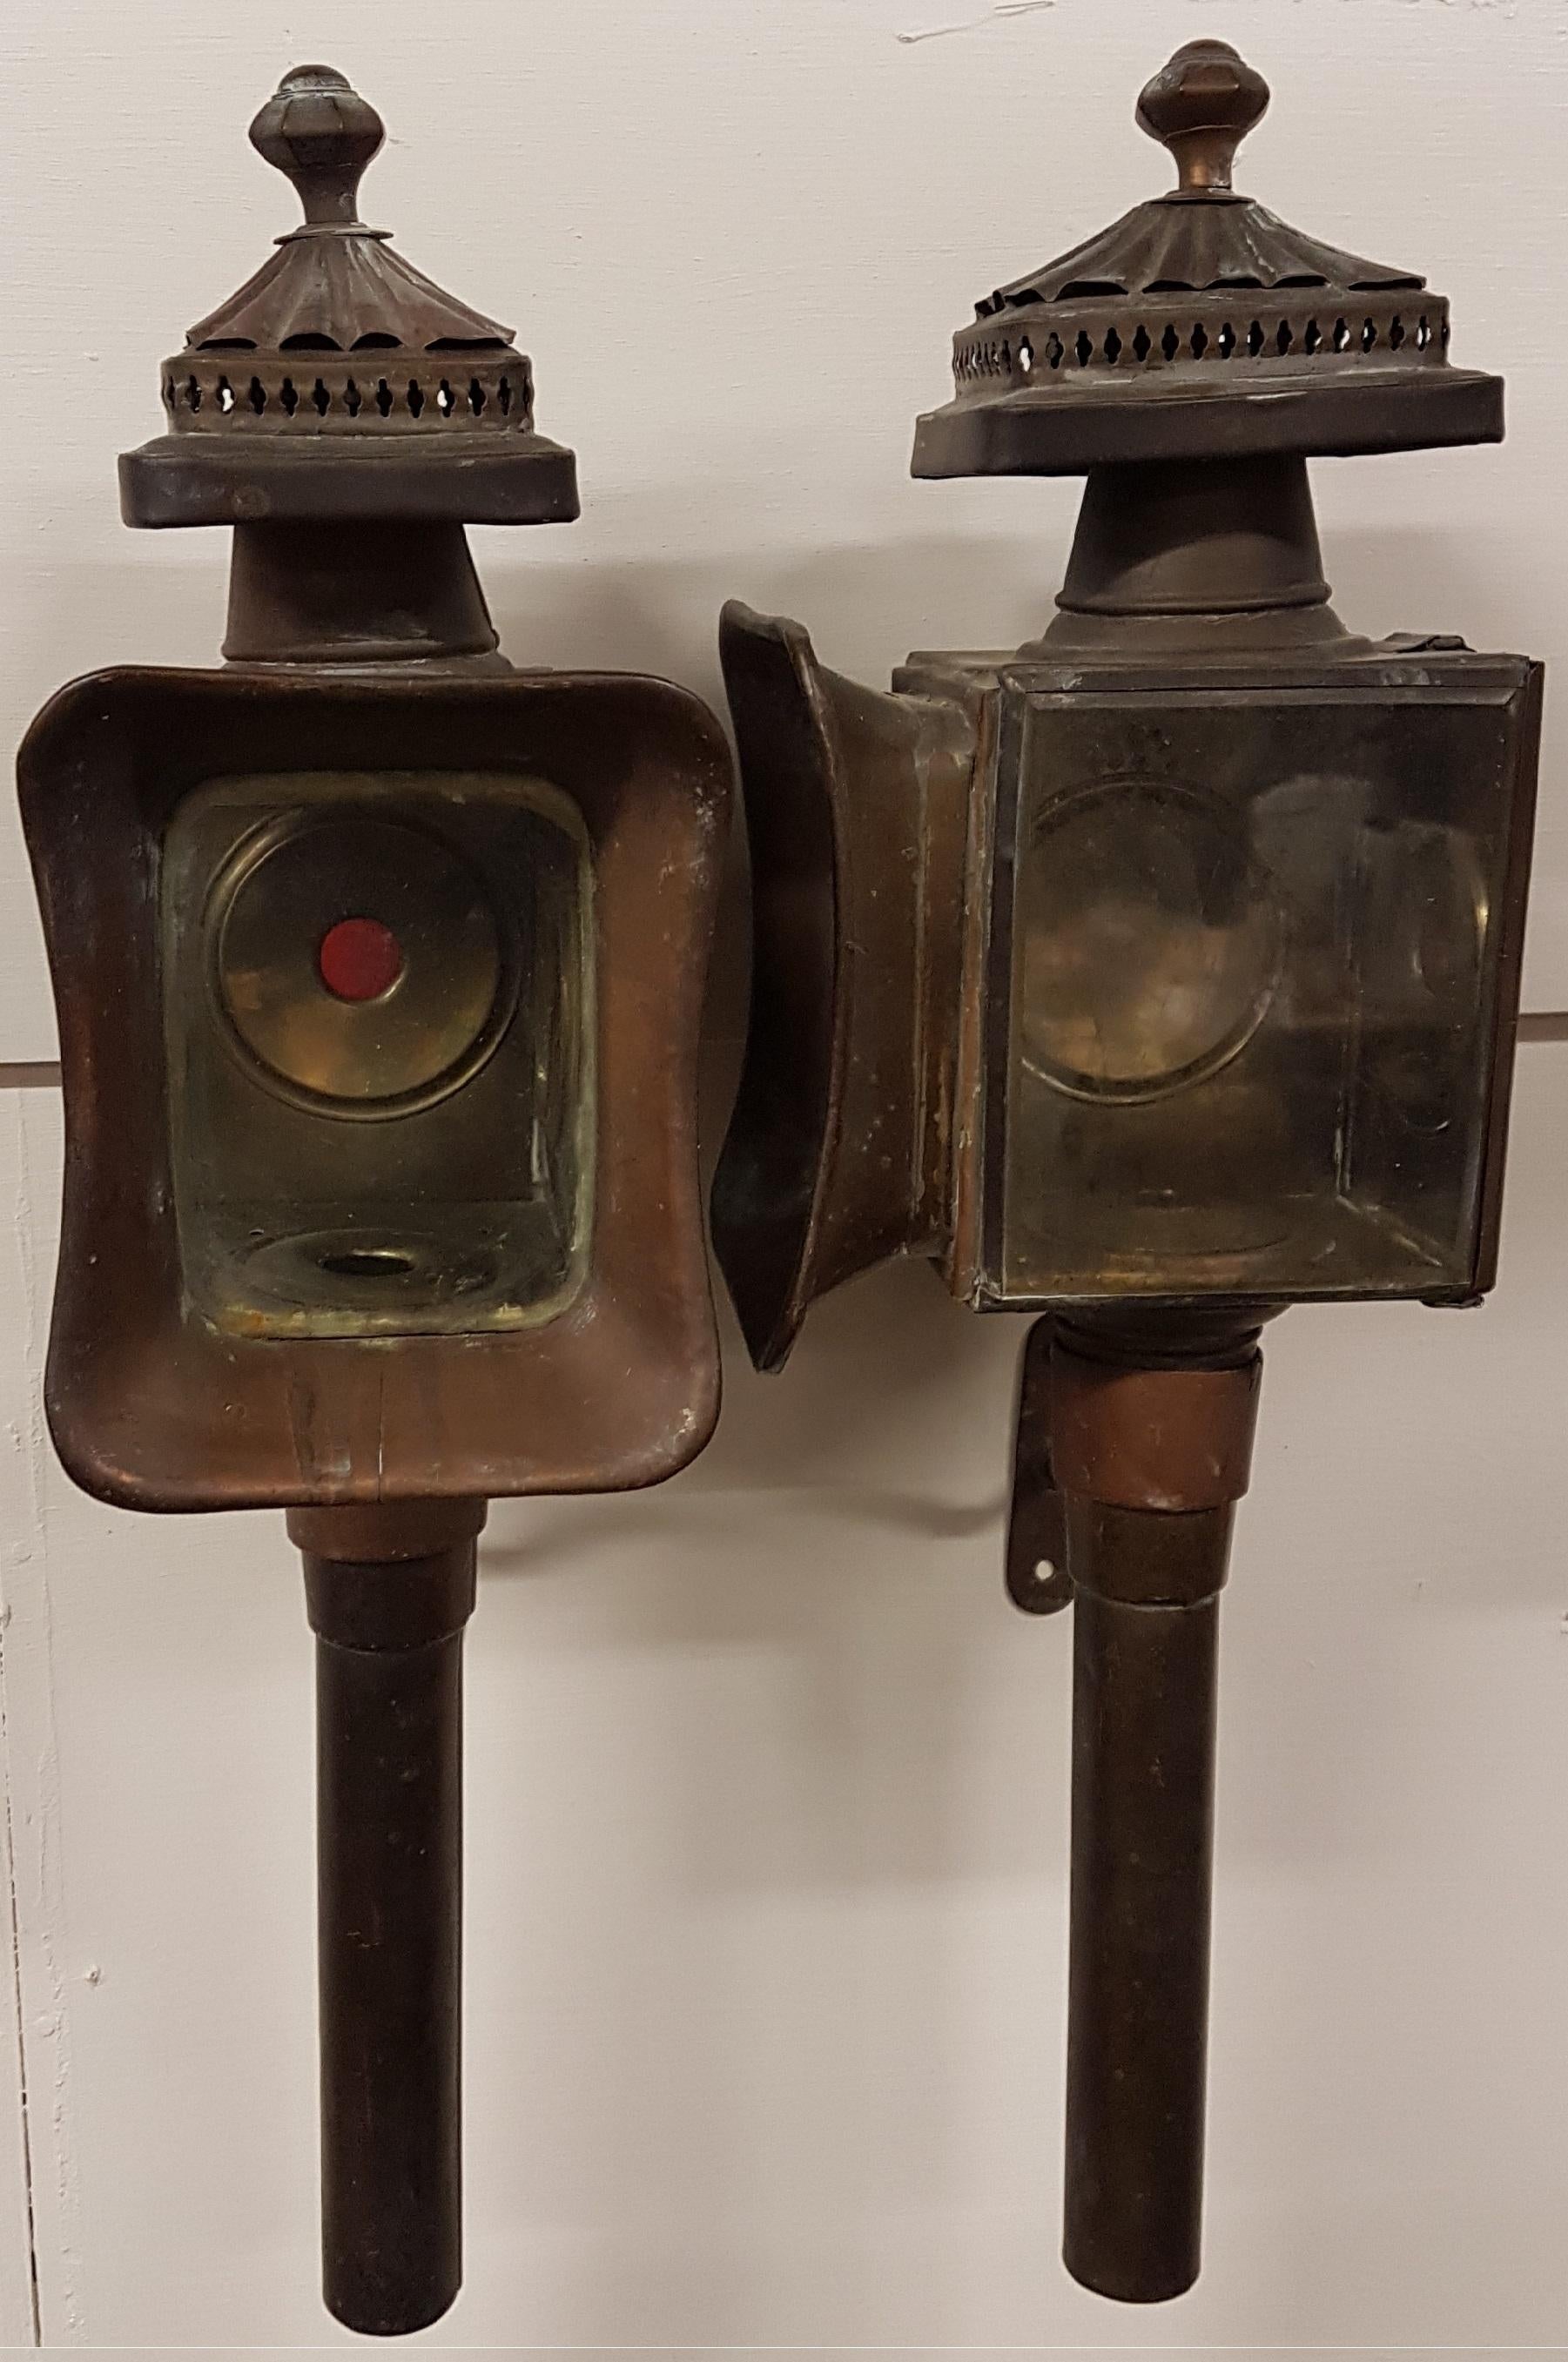 Pair of Brass and Copper Carriage Lanterns (Messing)